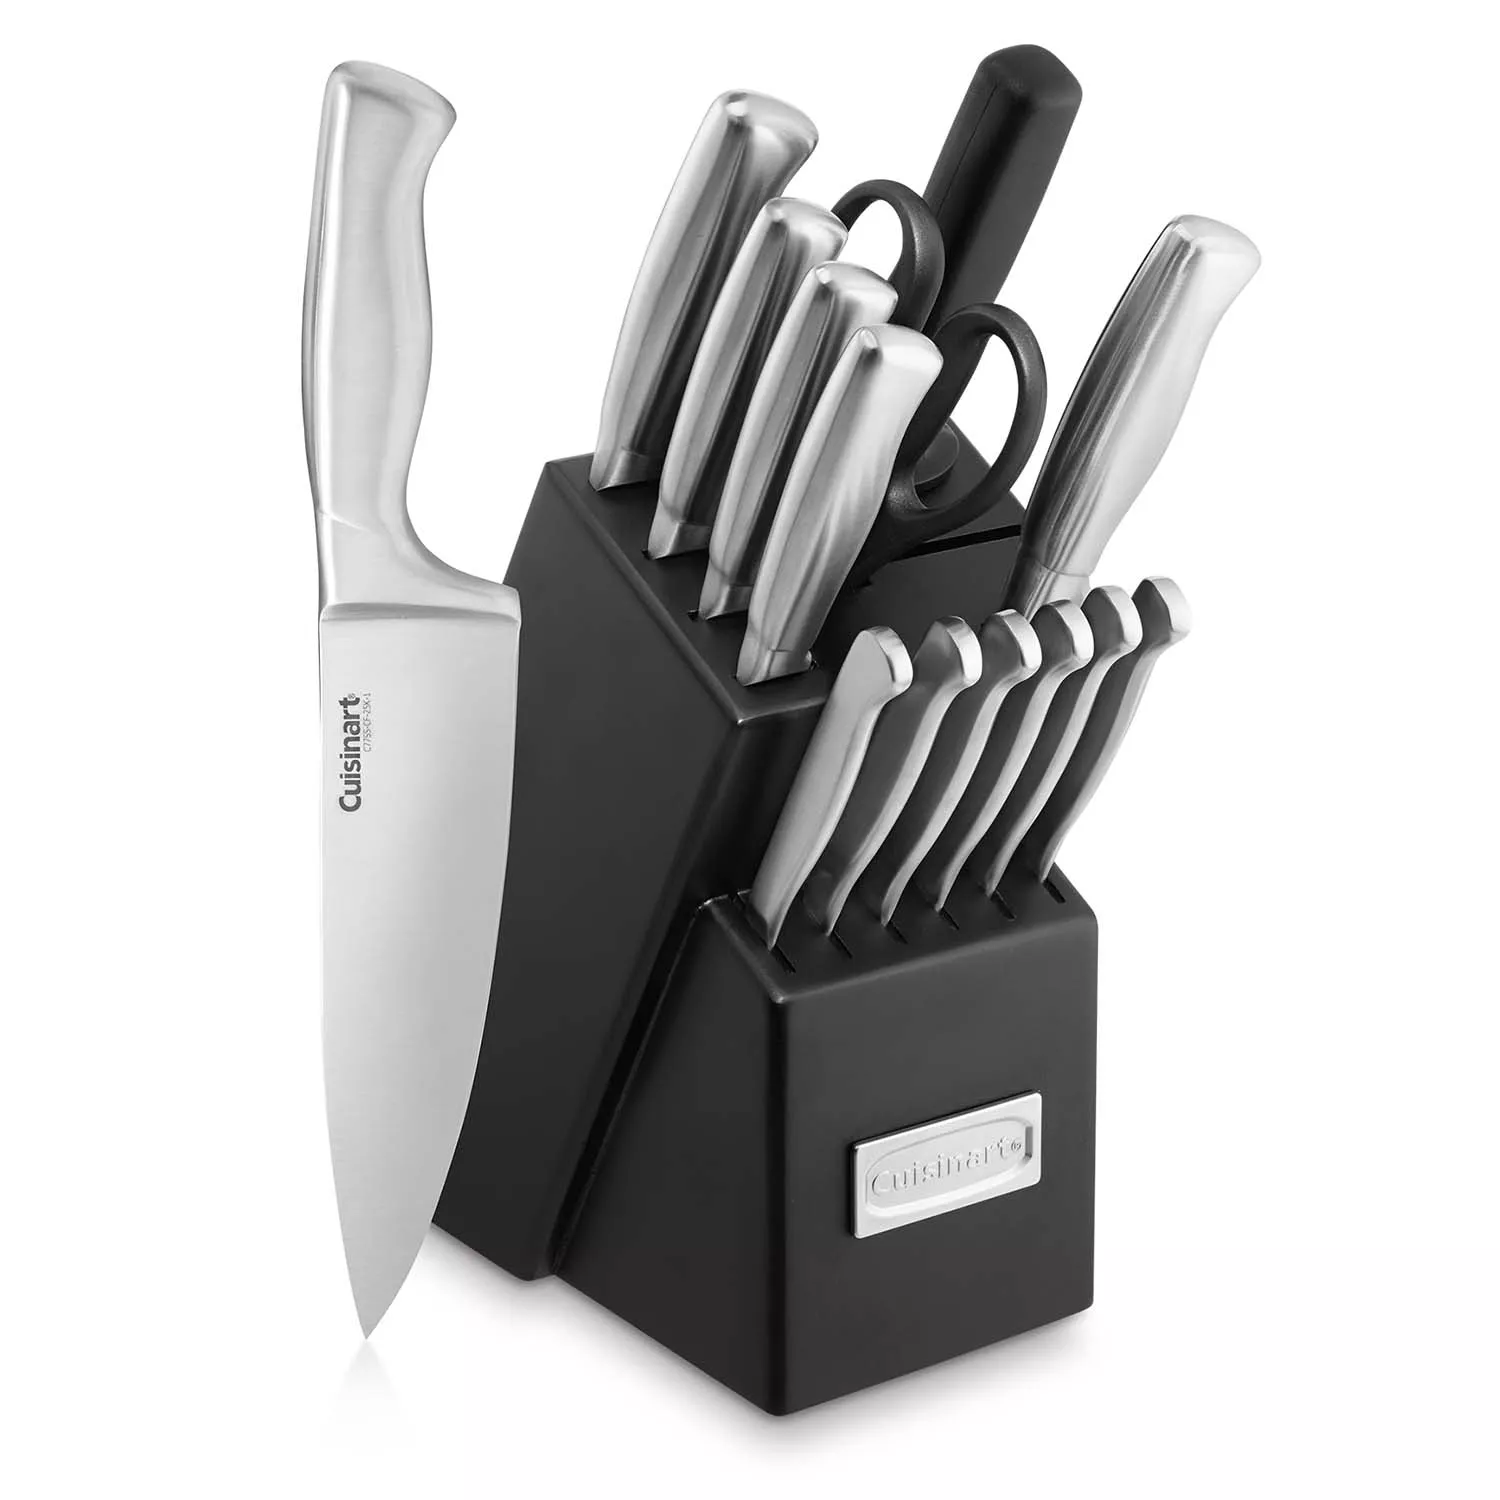 This 12-piece Cuisinart knife set is $15 at